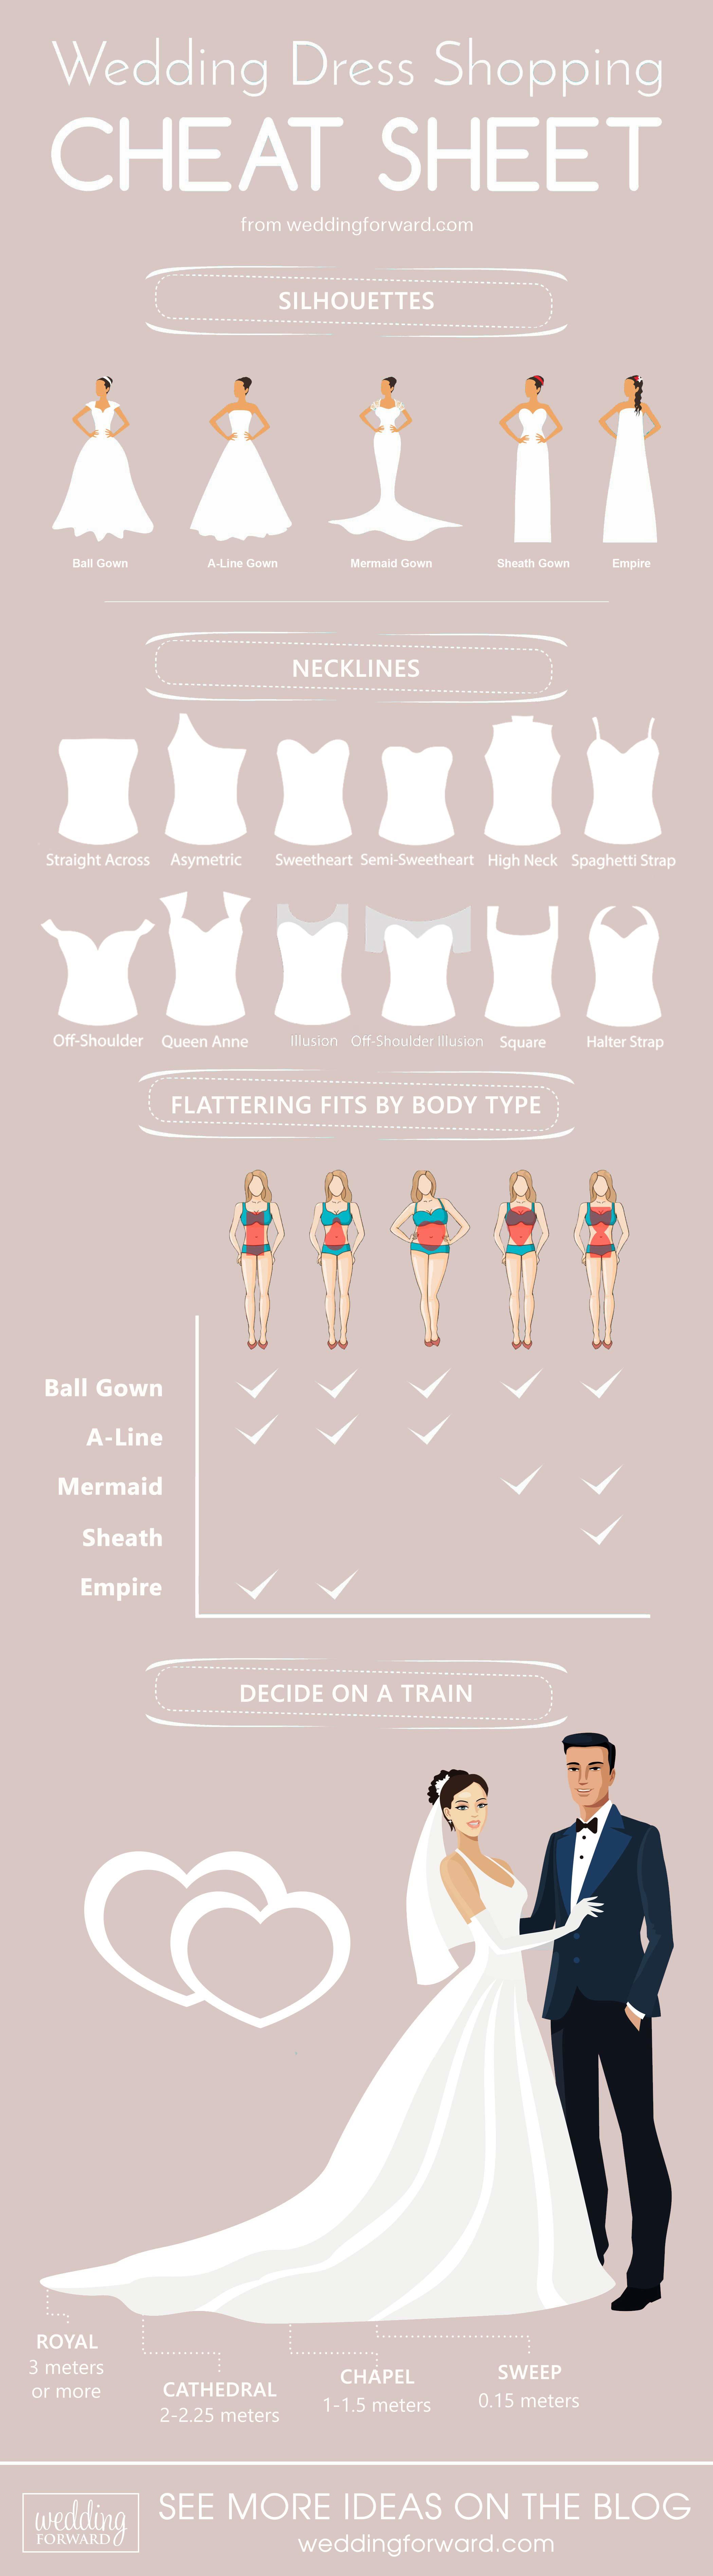 guide to wedding dresses infographic cheat sheet